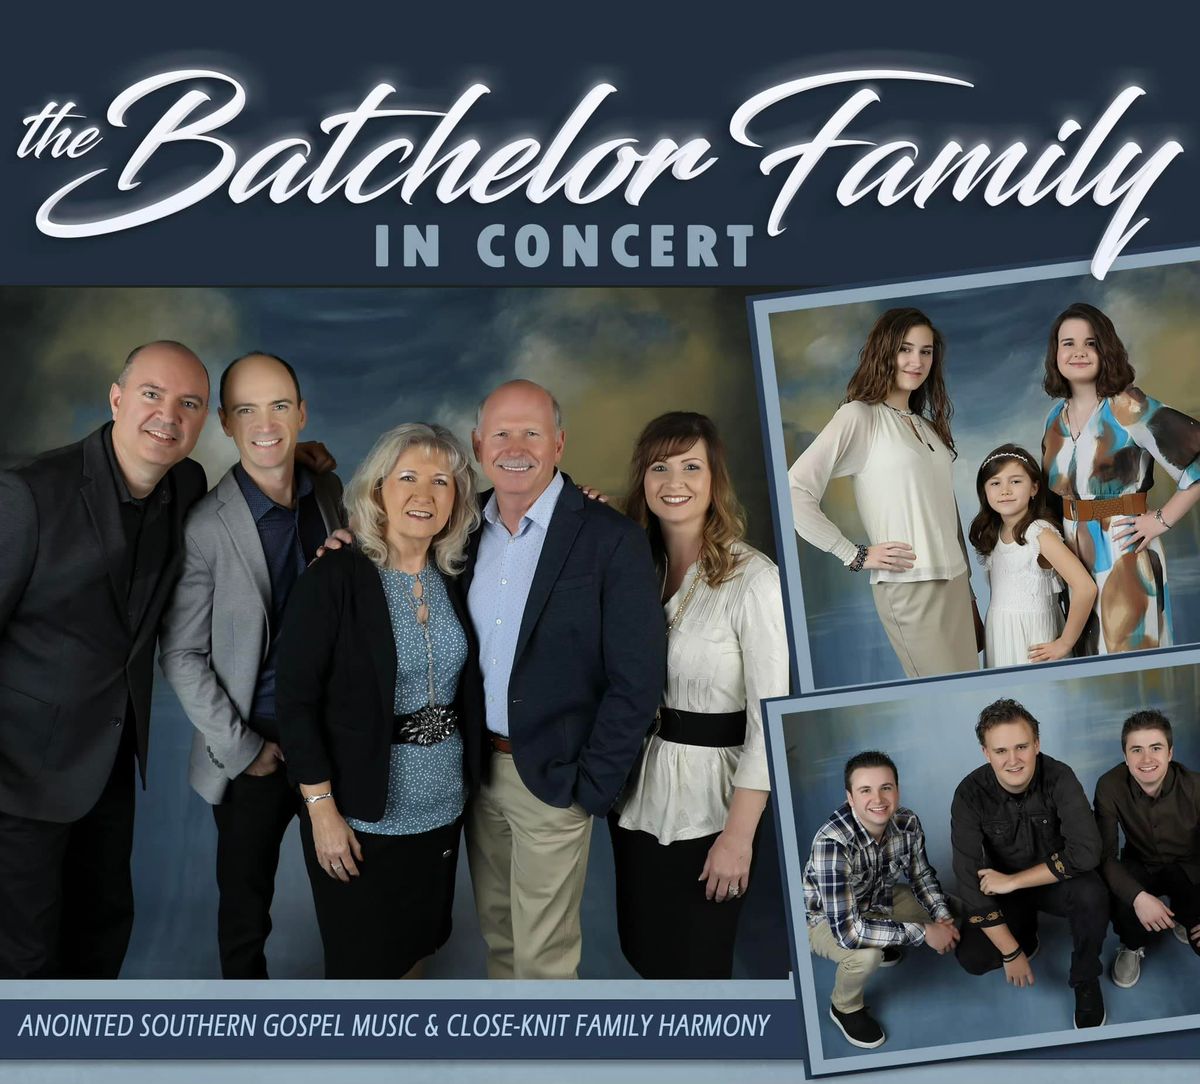 The Batchelor Family in Concert